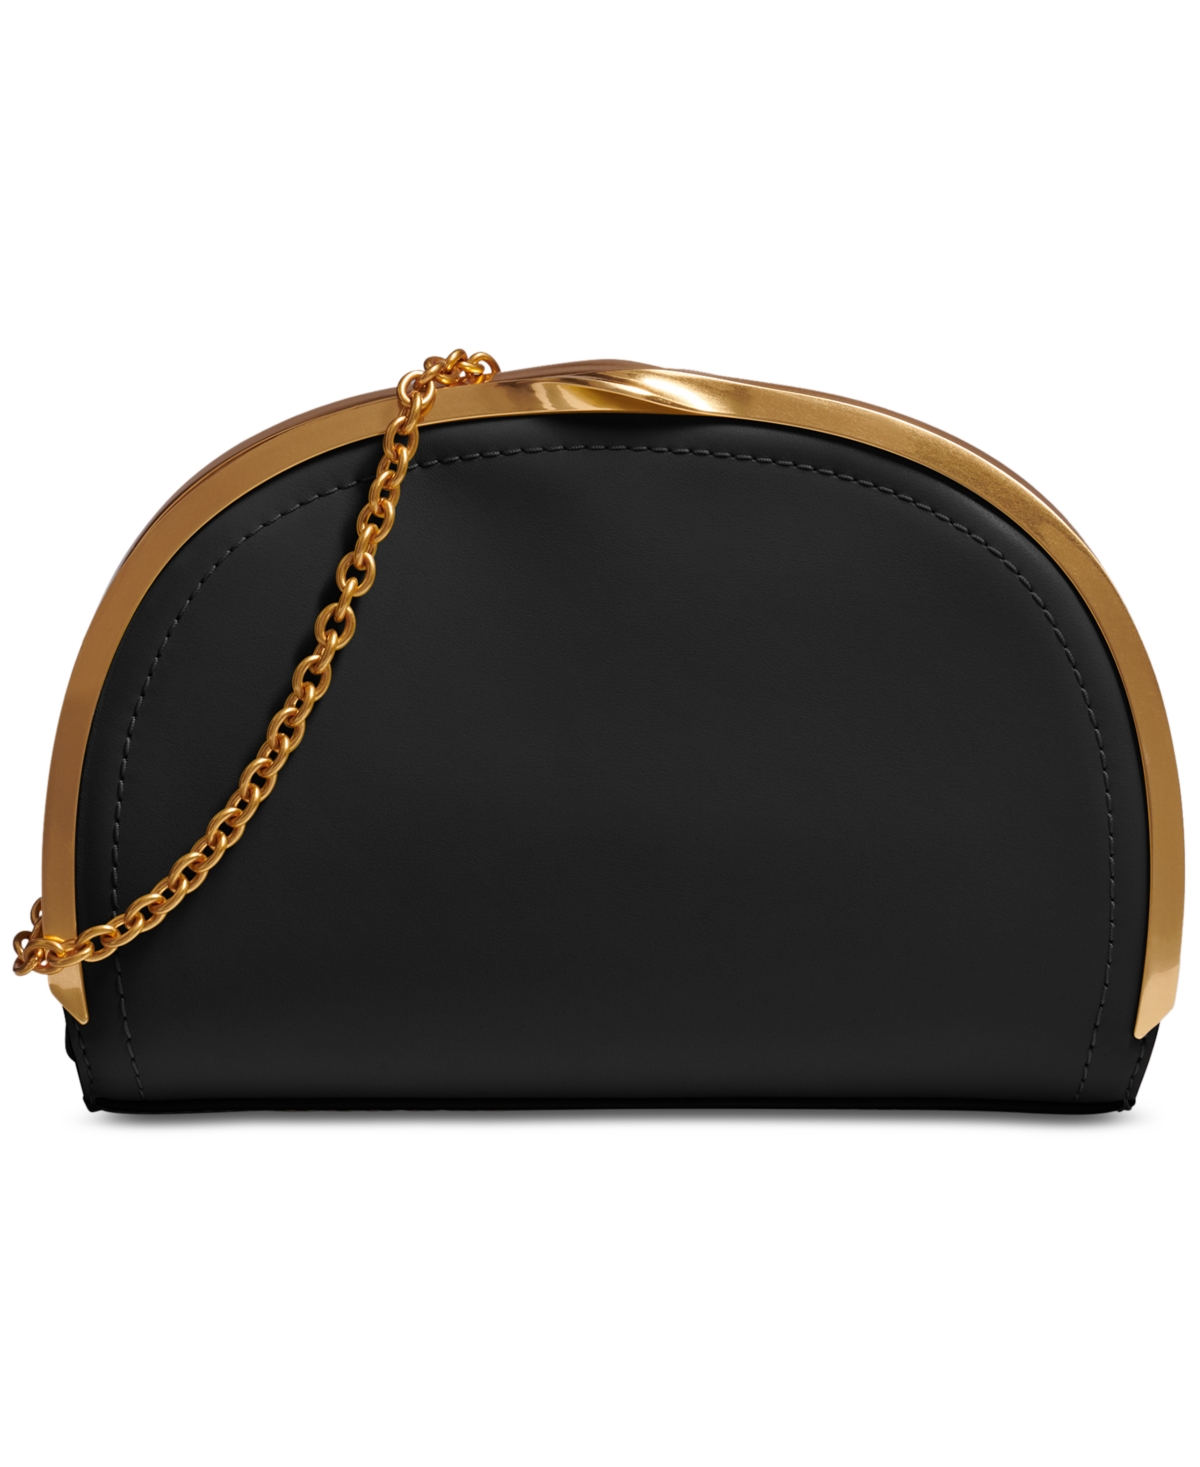 Lawrence Chain Clutch - Black/gold